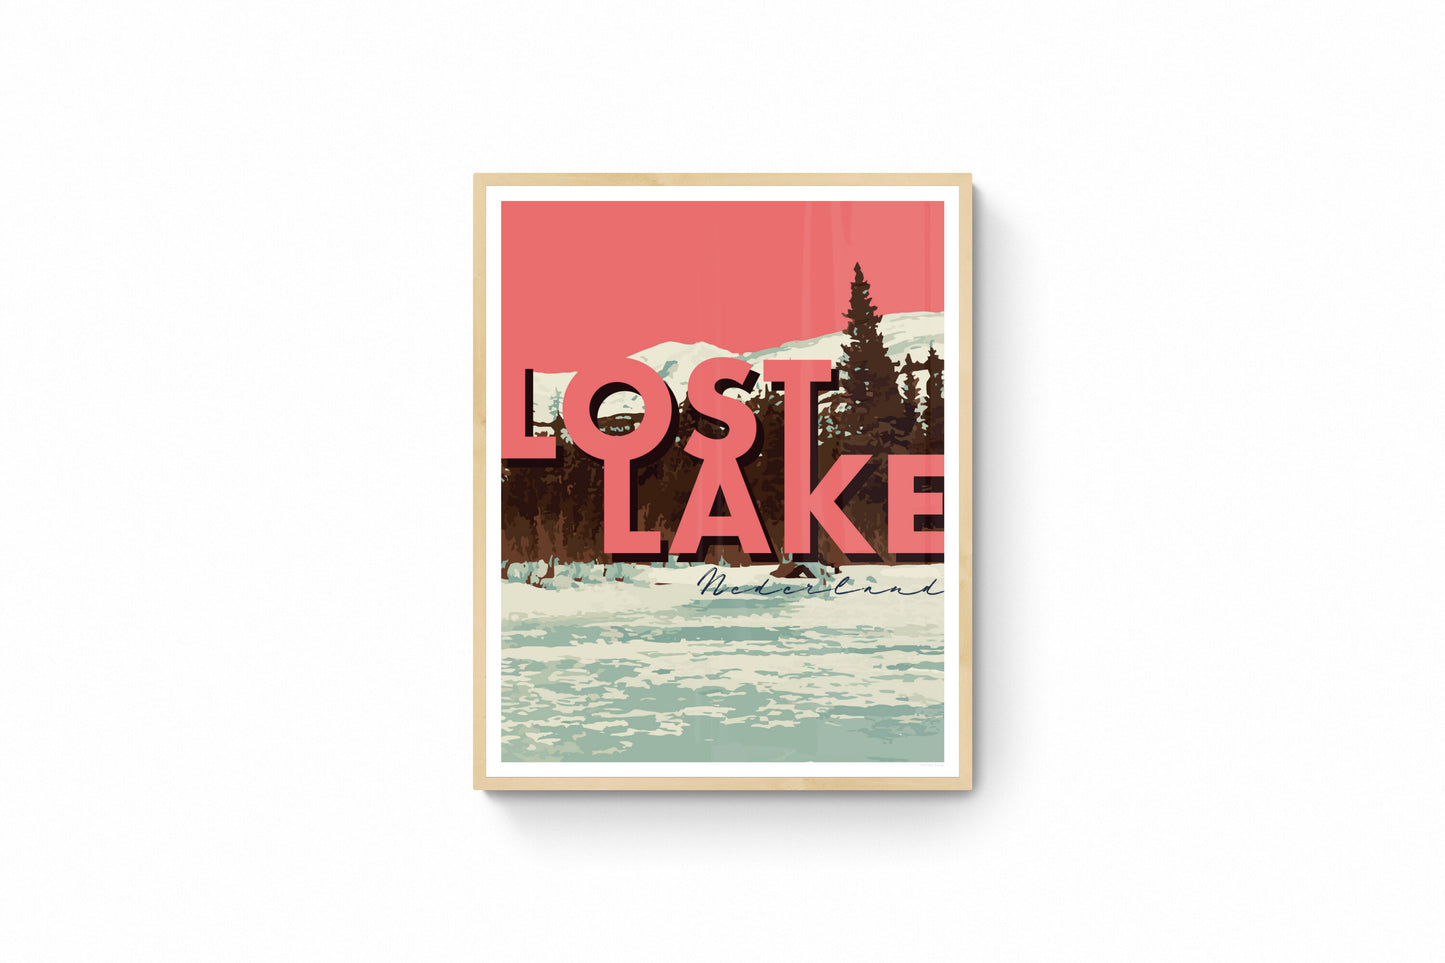 Nederland, Colorado - Lost Lake (Coral), Framed Wall Art w/ Large Text, 14x11